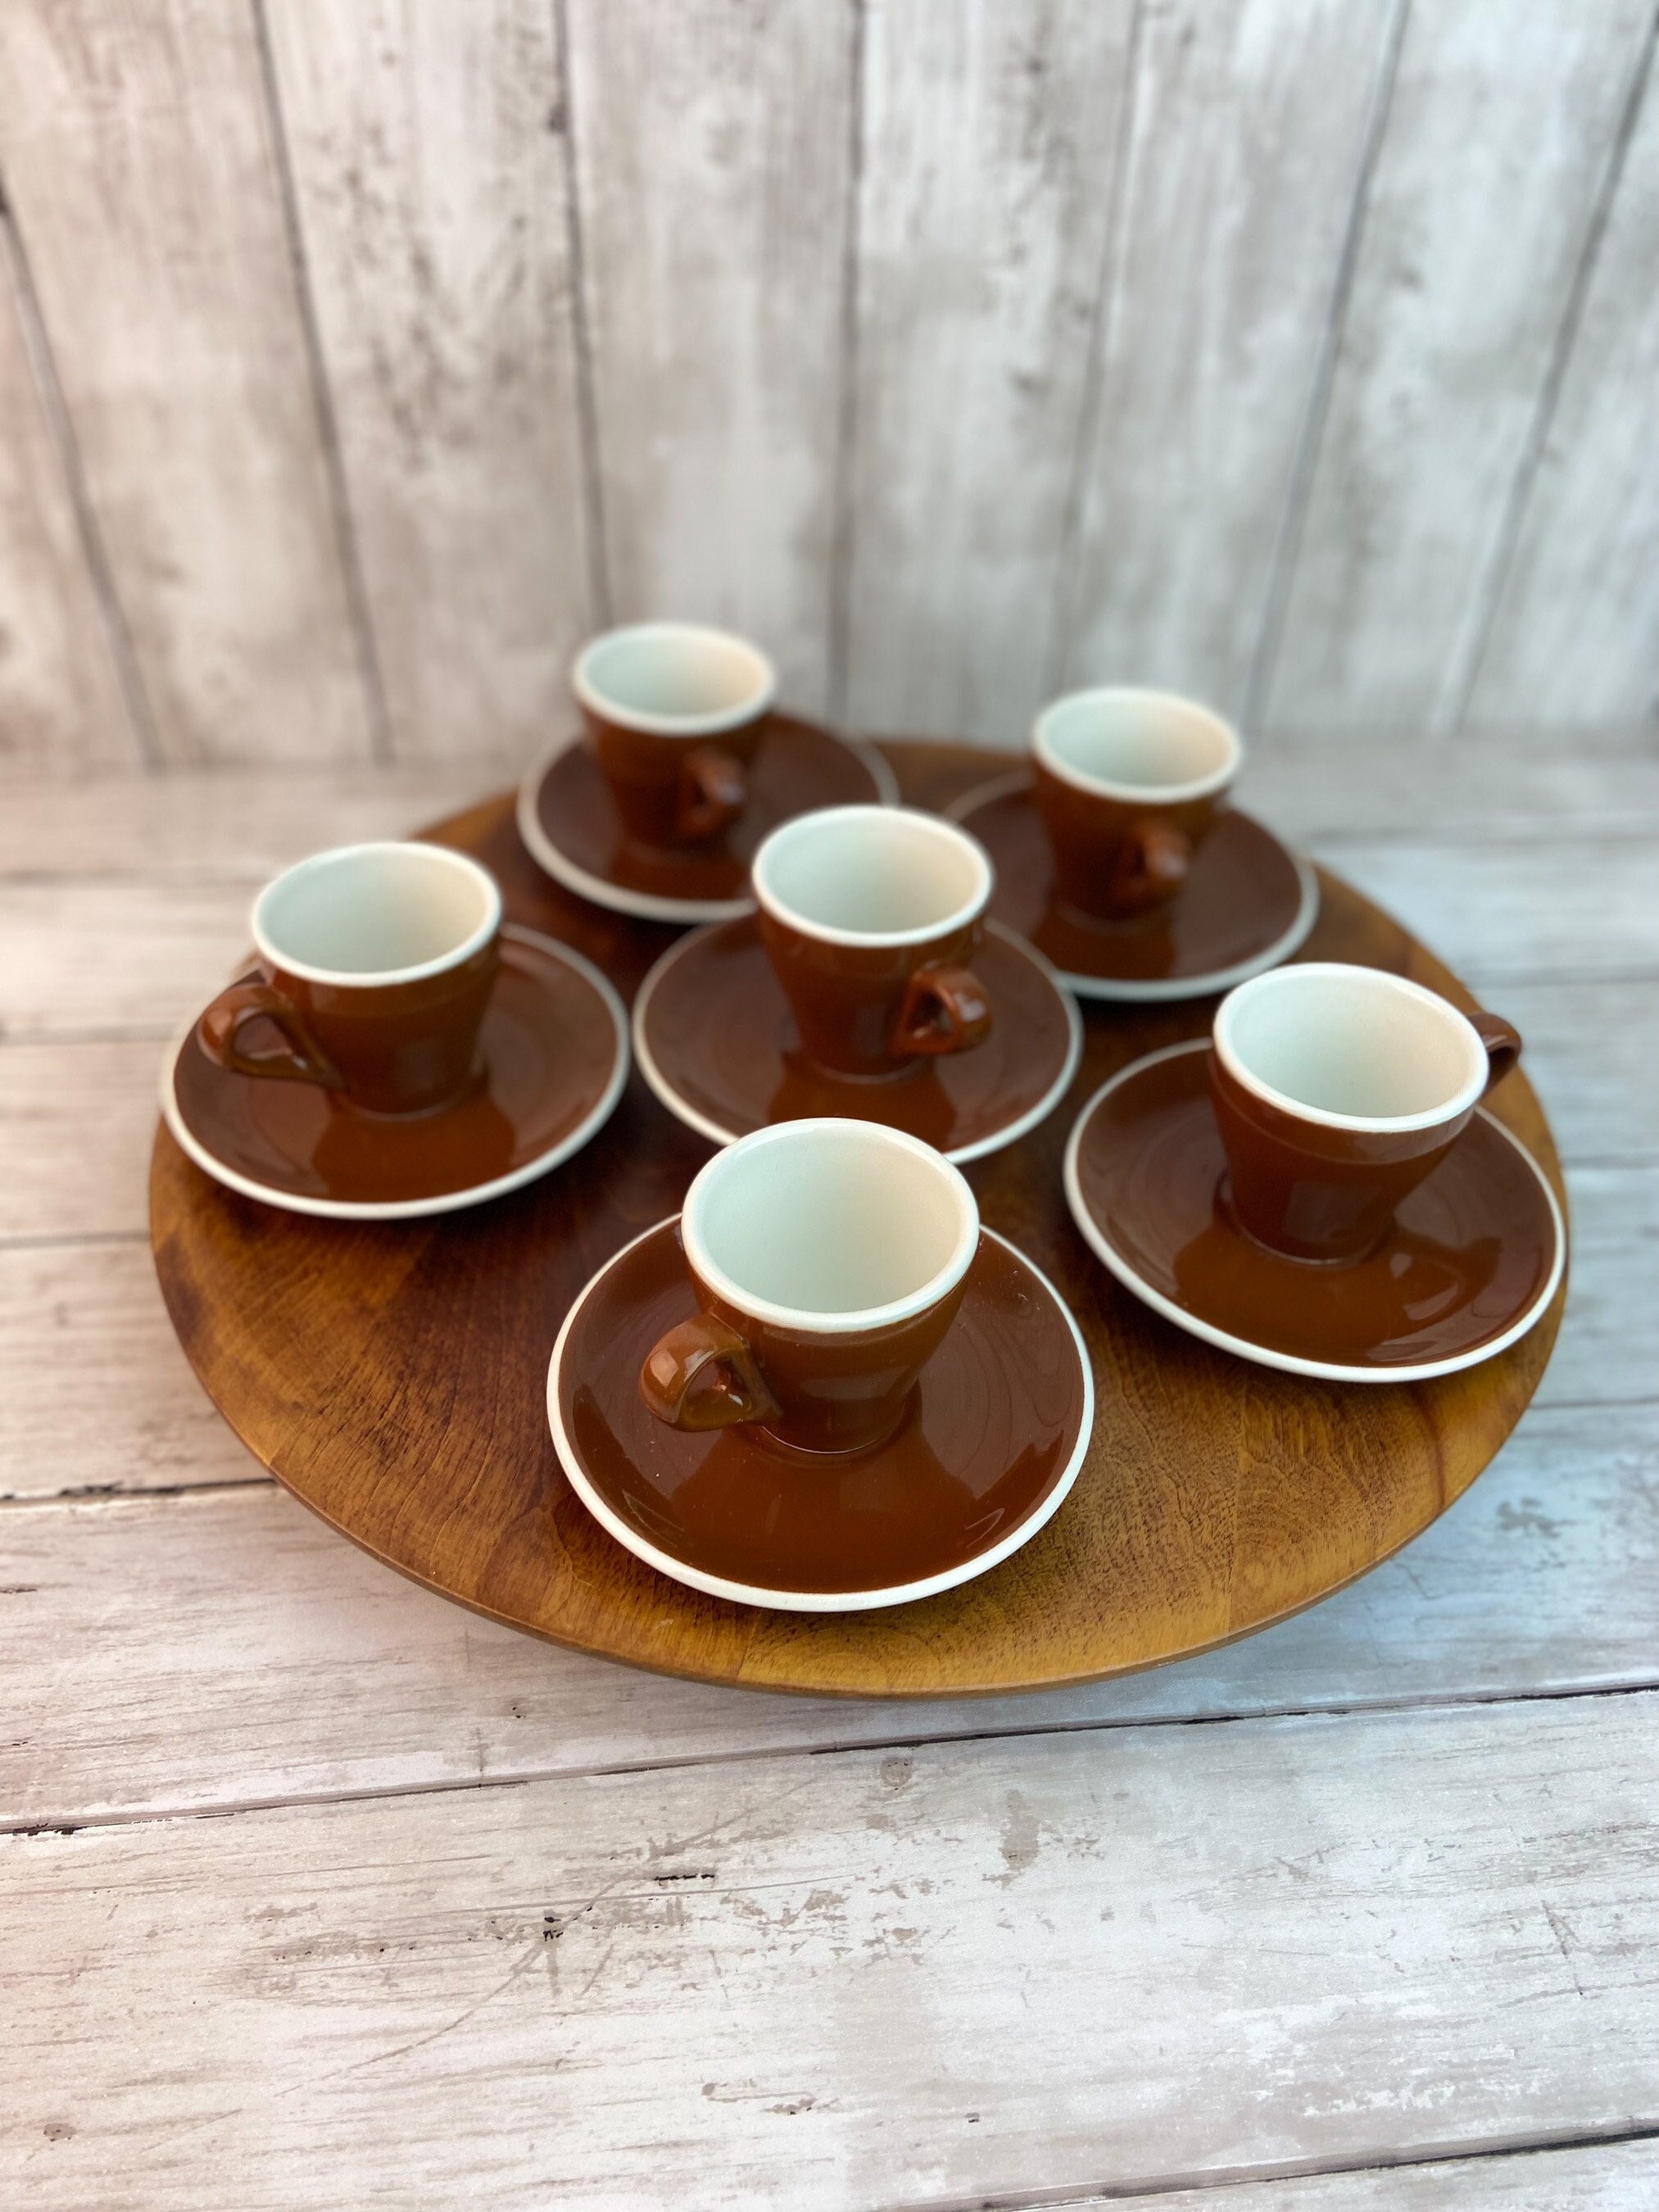 Acf Espresso Cups Demitasse Cups Made In Italy Vintage Espresso Cups